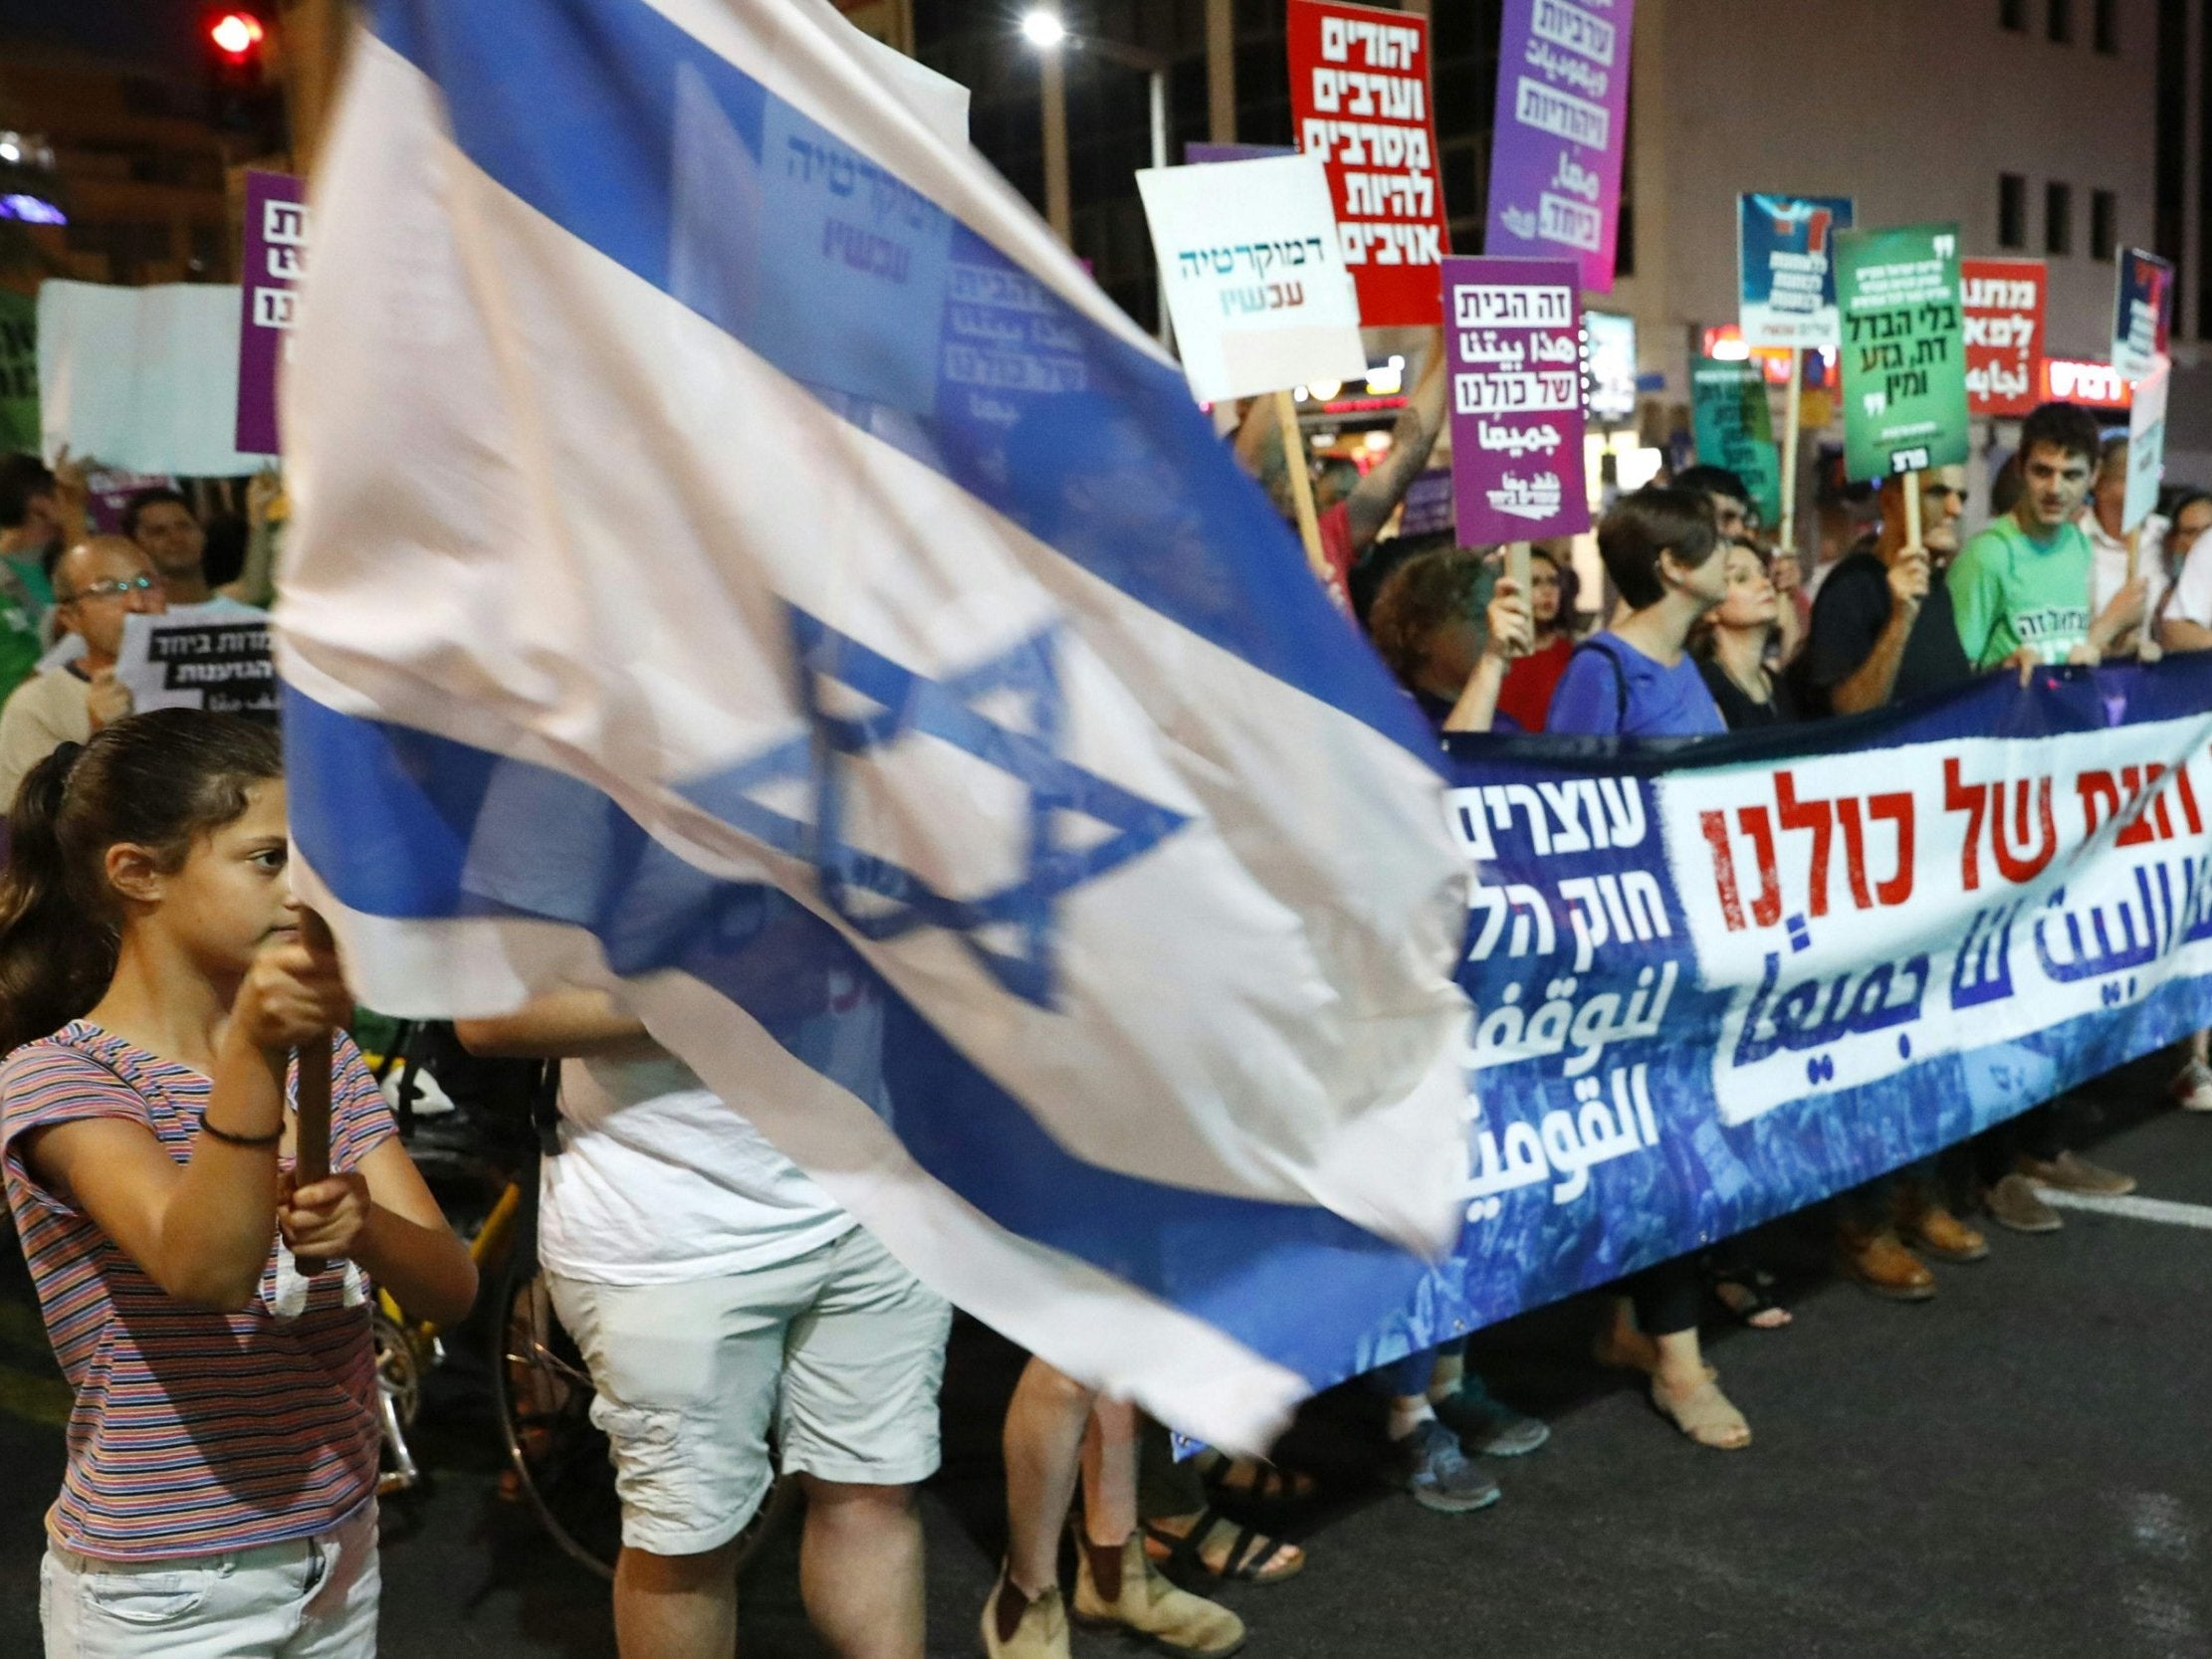 Demonstrators attend a rally in Tel Aviv to protest against the Jewish nation state bill